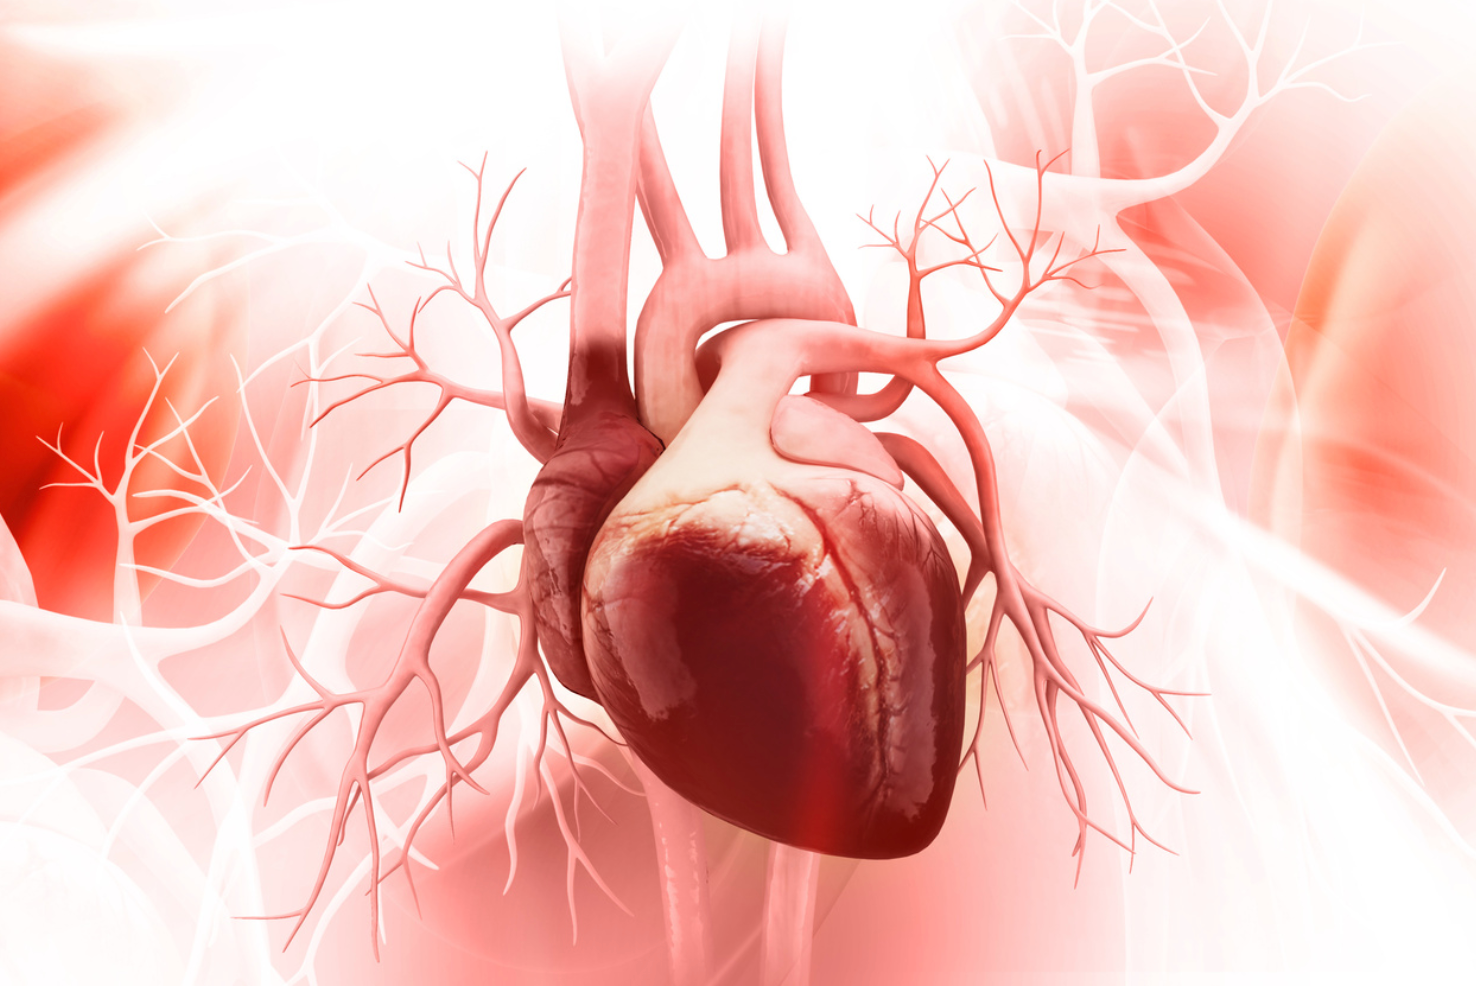 Study: Adult Cancer Survivors Have Higher Risk of Cardiovascular Disease Later in Life